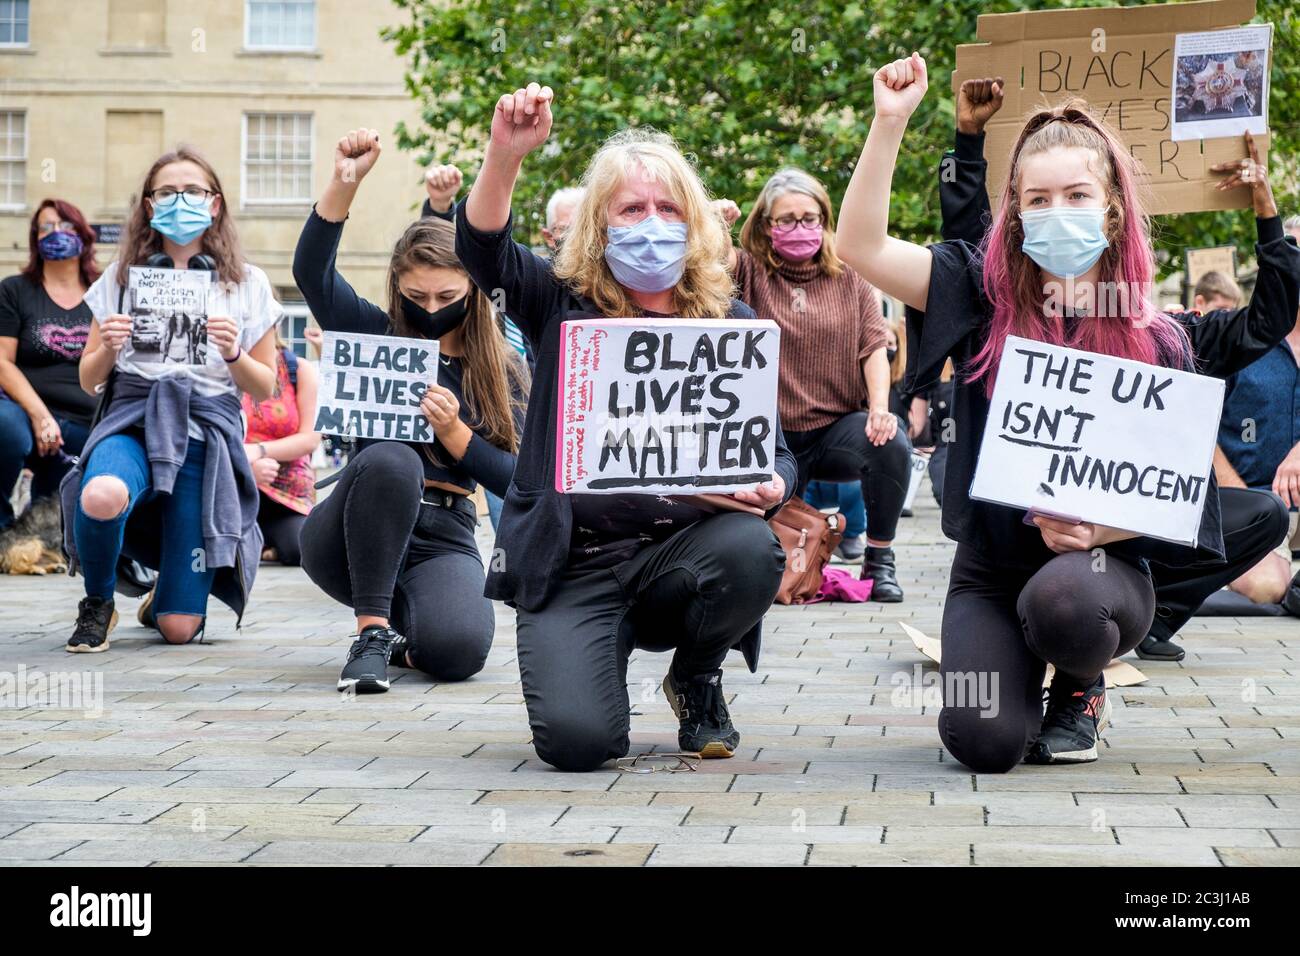 Chippenham, Wiltshire, UK. 20th June, 2020. BLM Protesters hold up BLM placards and signs as they take a knee during a Black Lives Matter BLM protest rally in the town's Market Place. The rally was organised in order for local people to draw attention to racism in the UK and to show solidarity with other BLM protests that have been taking place around the world after the death of George Floyd who died in police custody on 25th May in Minneapolis. Credit: Lynchpics/Alamy Live News Stock Photo